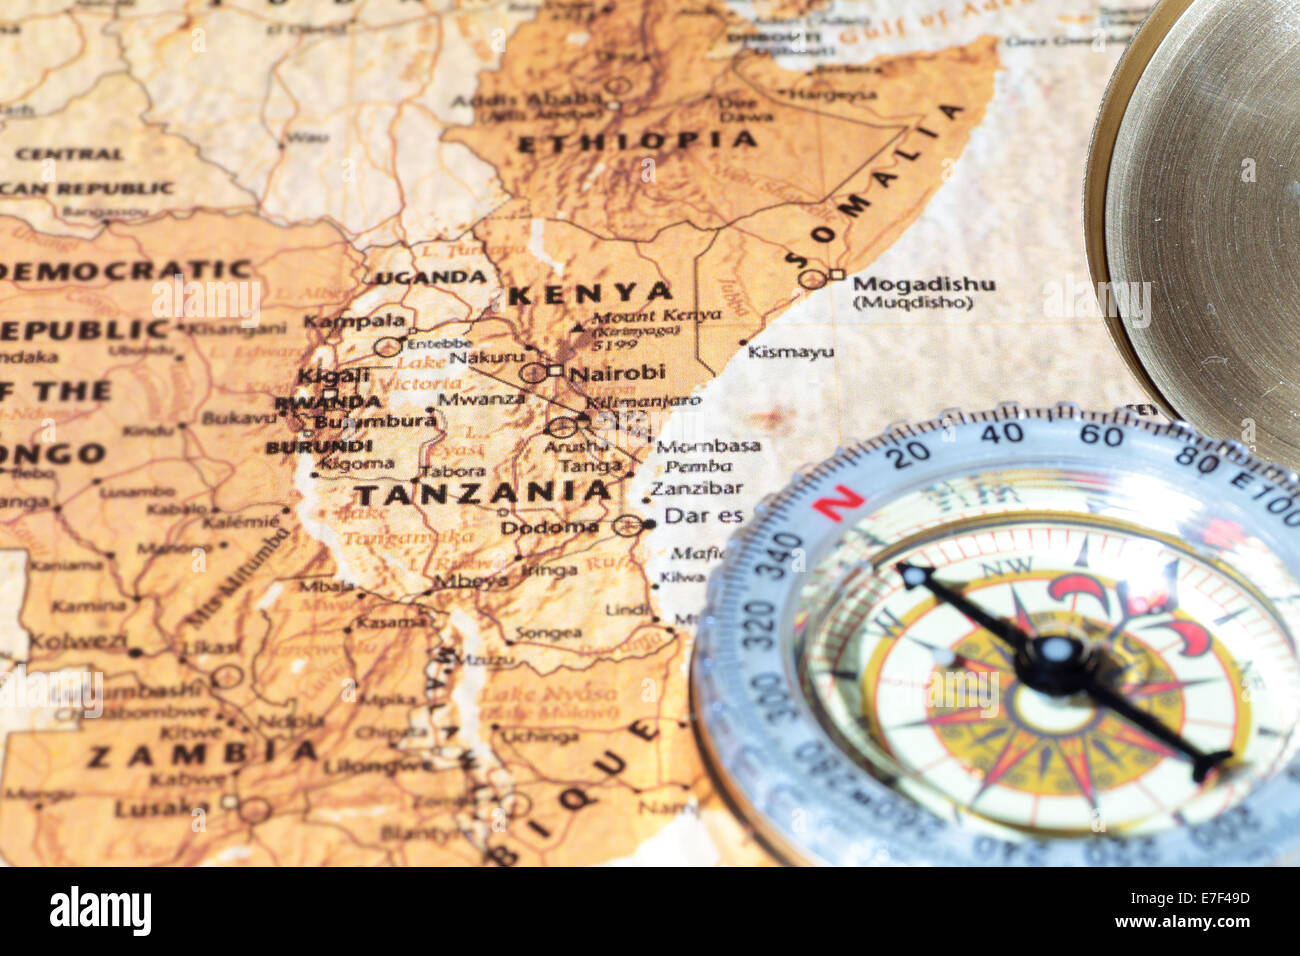 Compass on a map pointing at Tanzania and Kenya, planning a travel destination Stock Photo